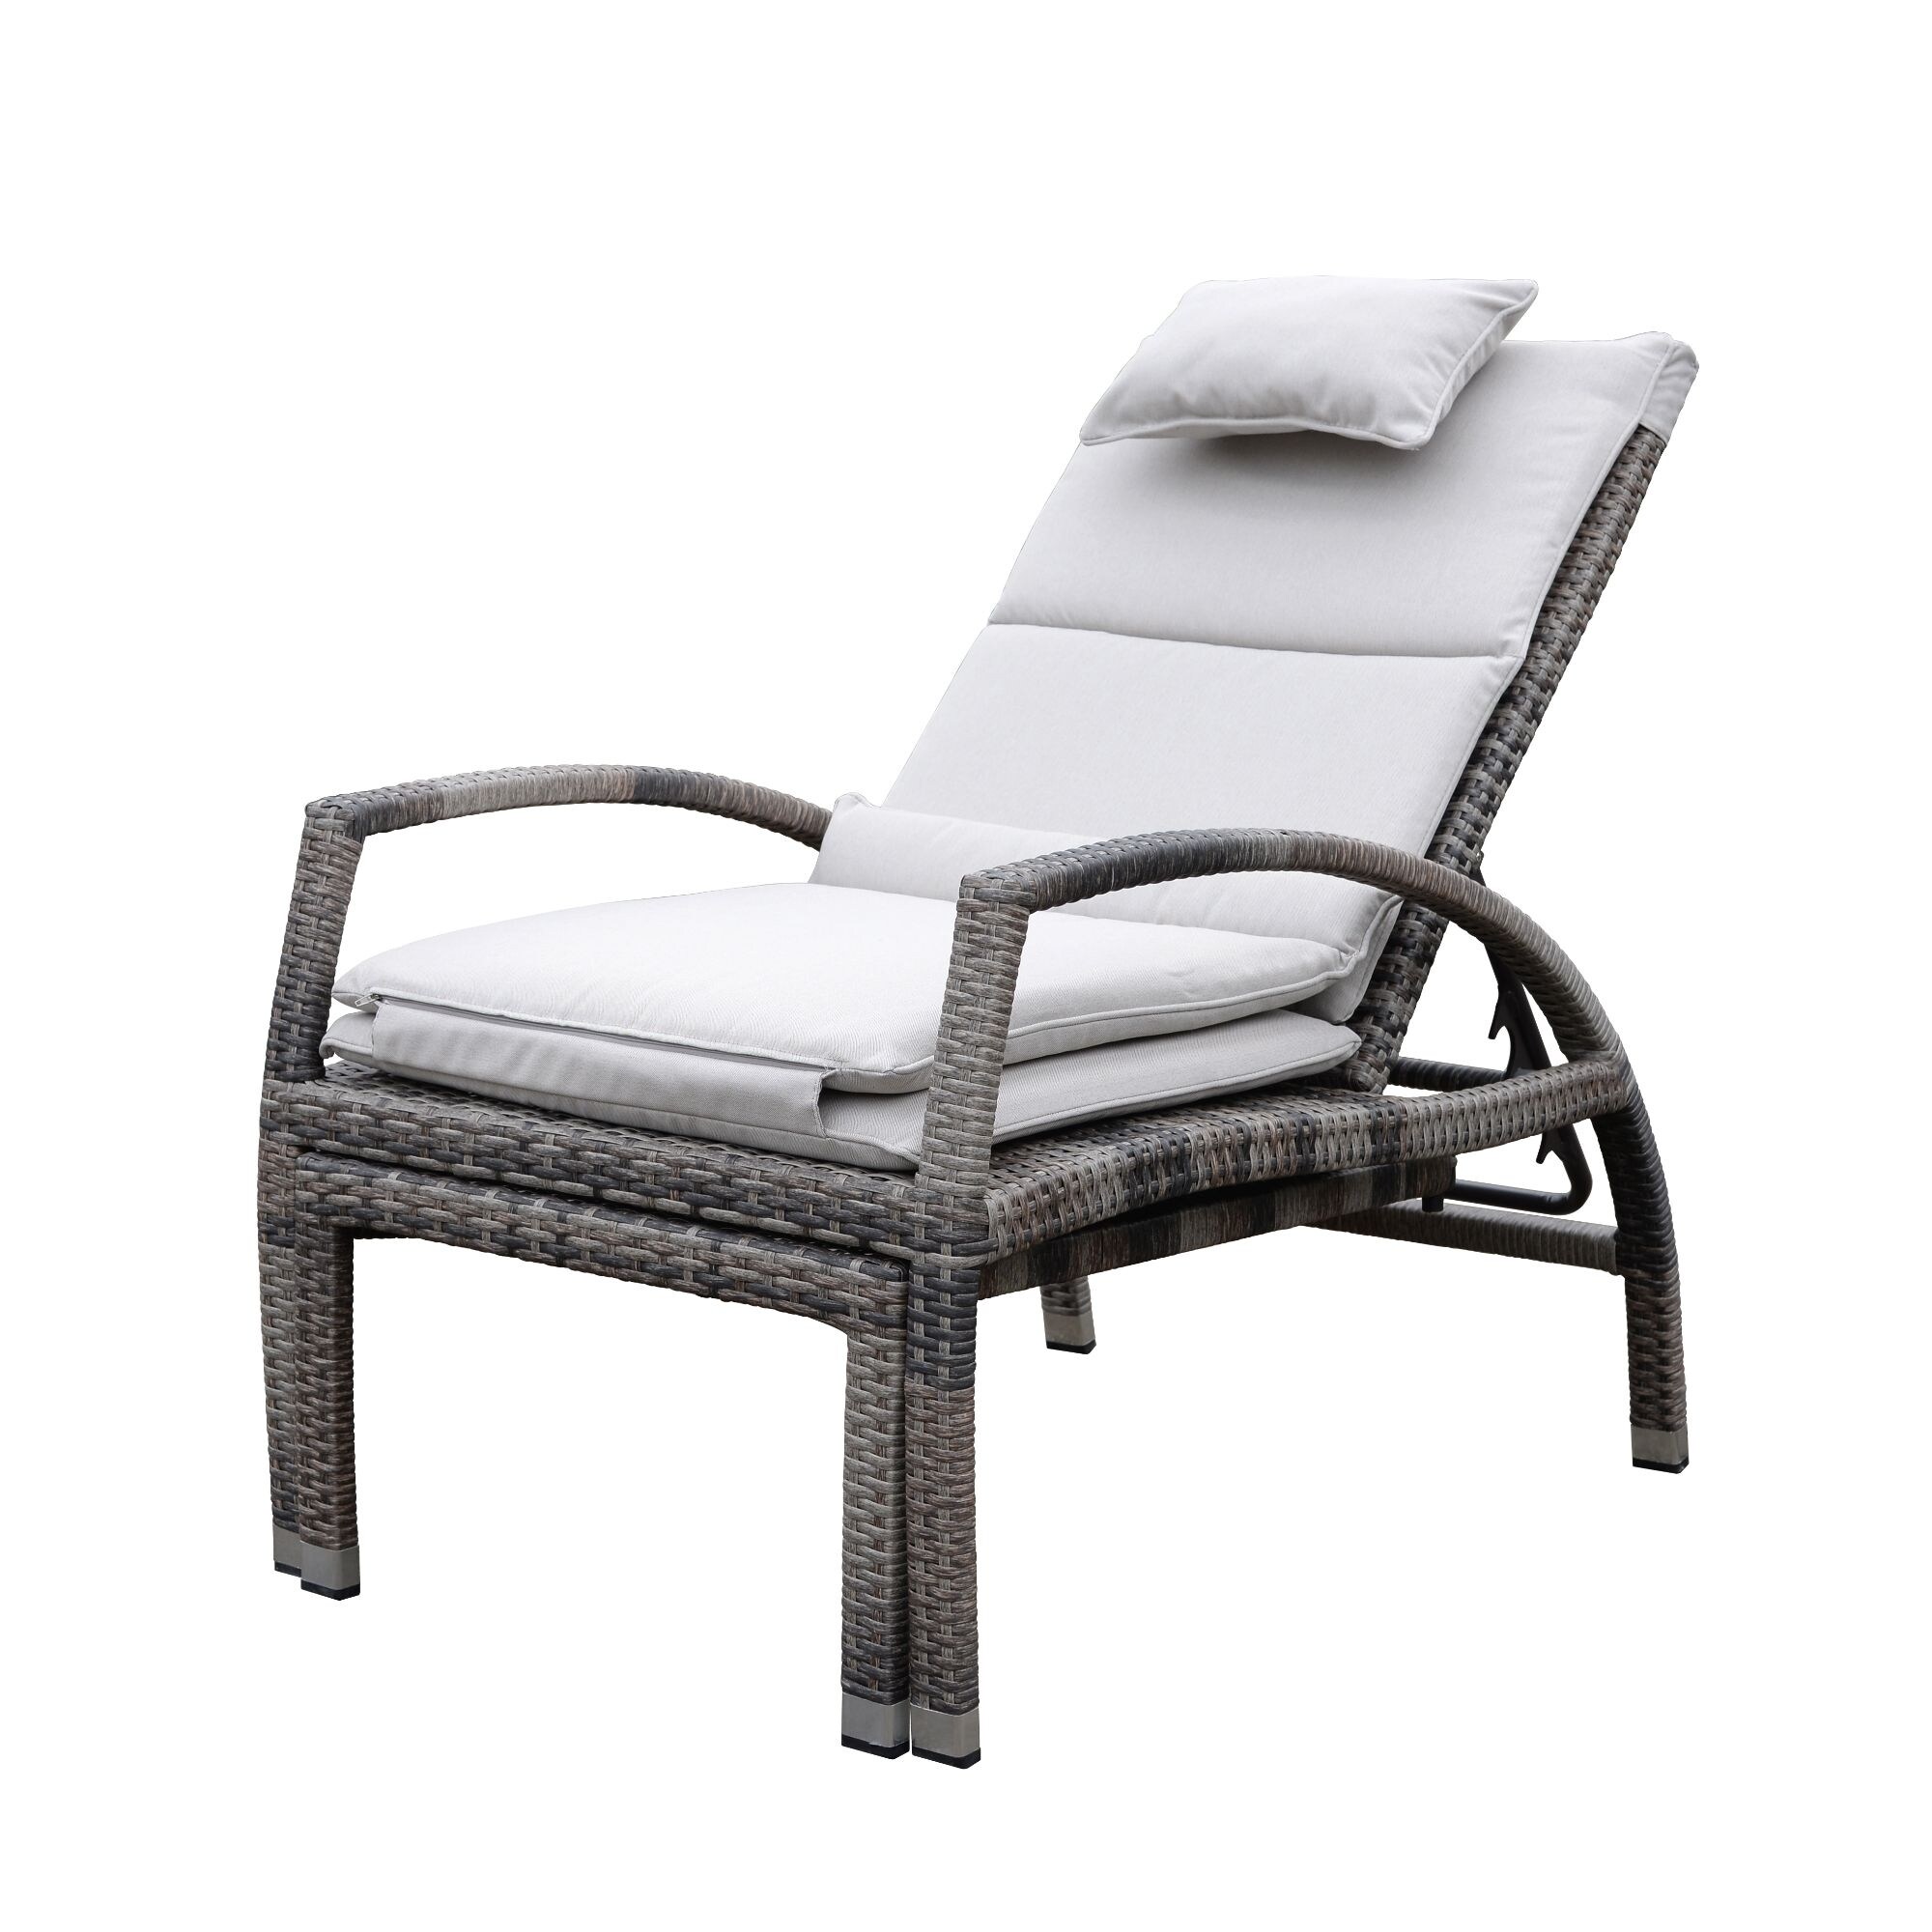 Courtyard Casual Taupe Beach Front Deck Chair to Chaise Lounge Combo - image 2 of 5